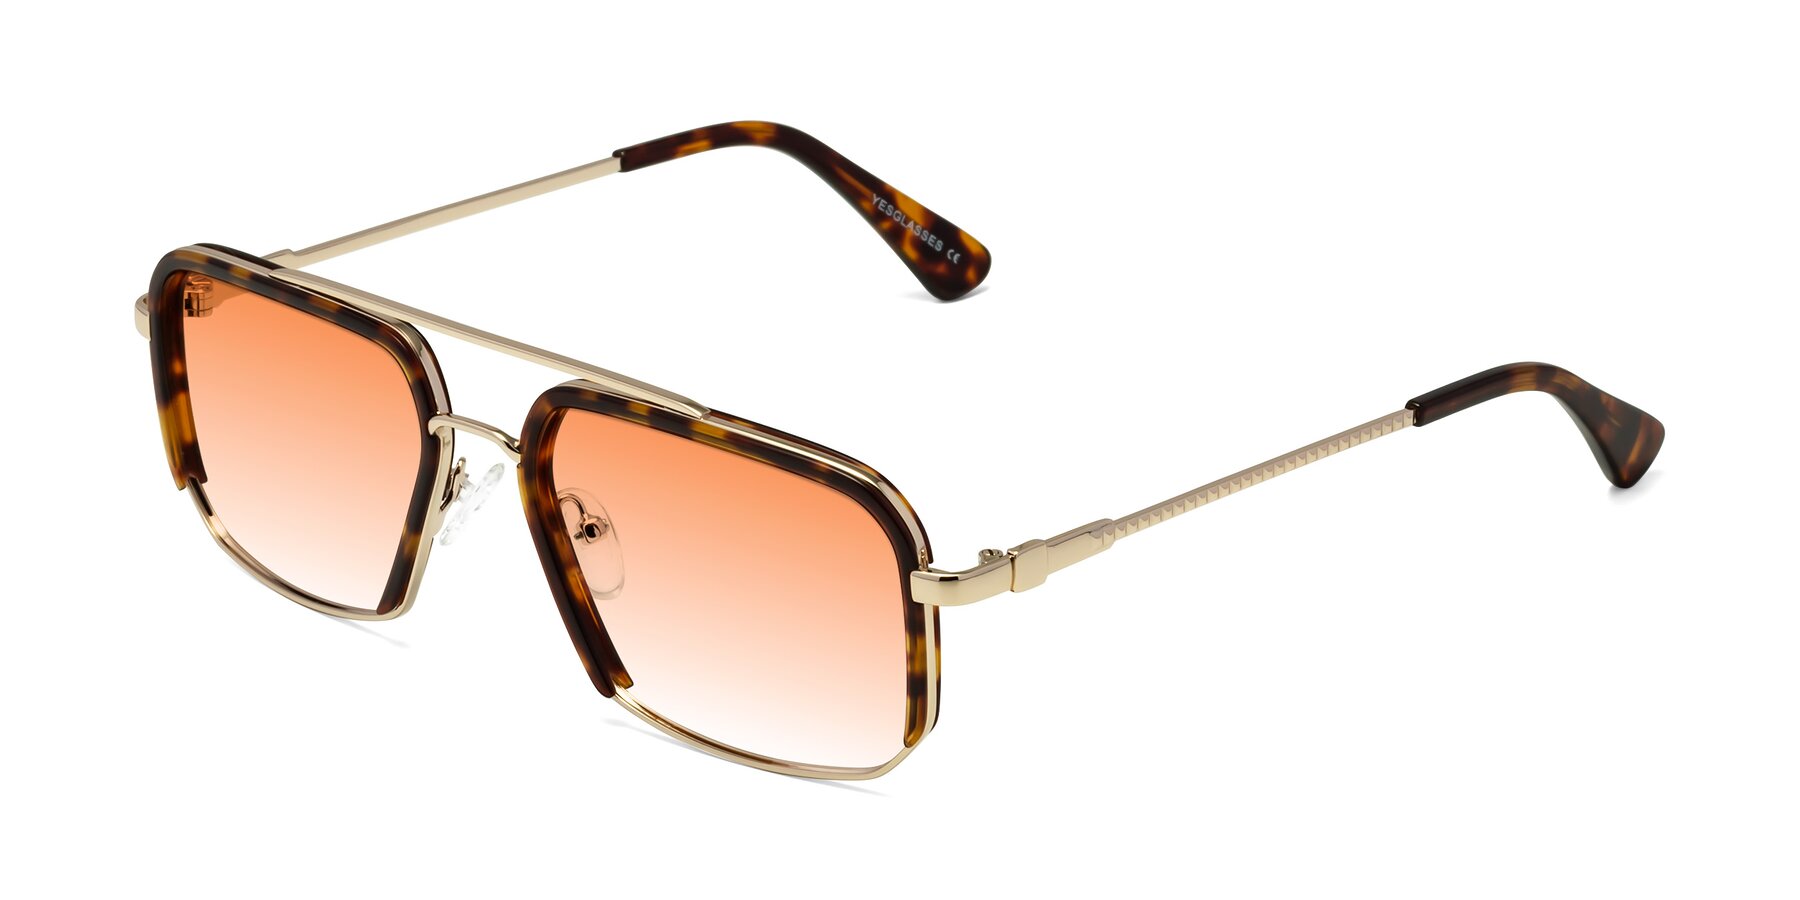 Angle of Dechter in Tortoise-Gold with Orange Gradient Lenses